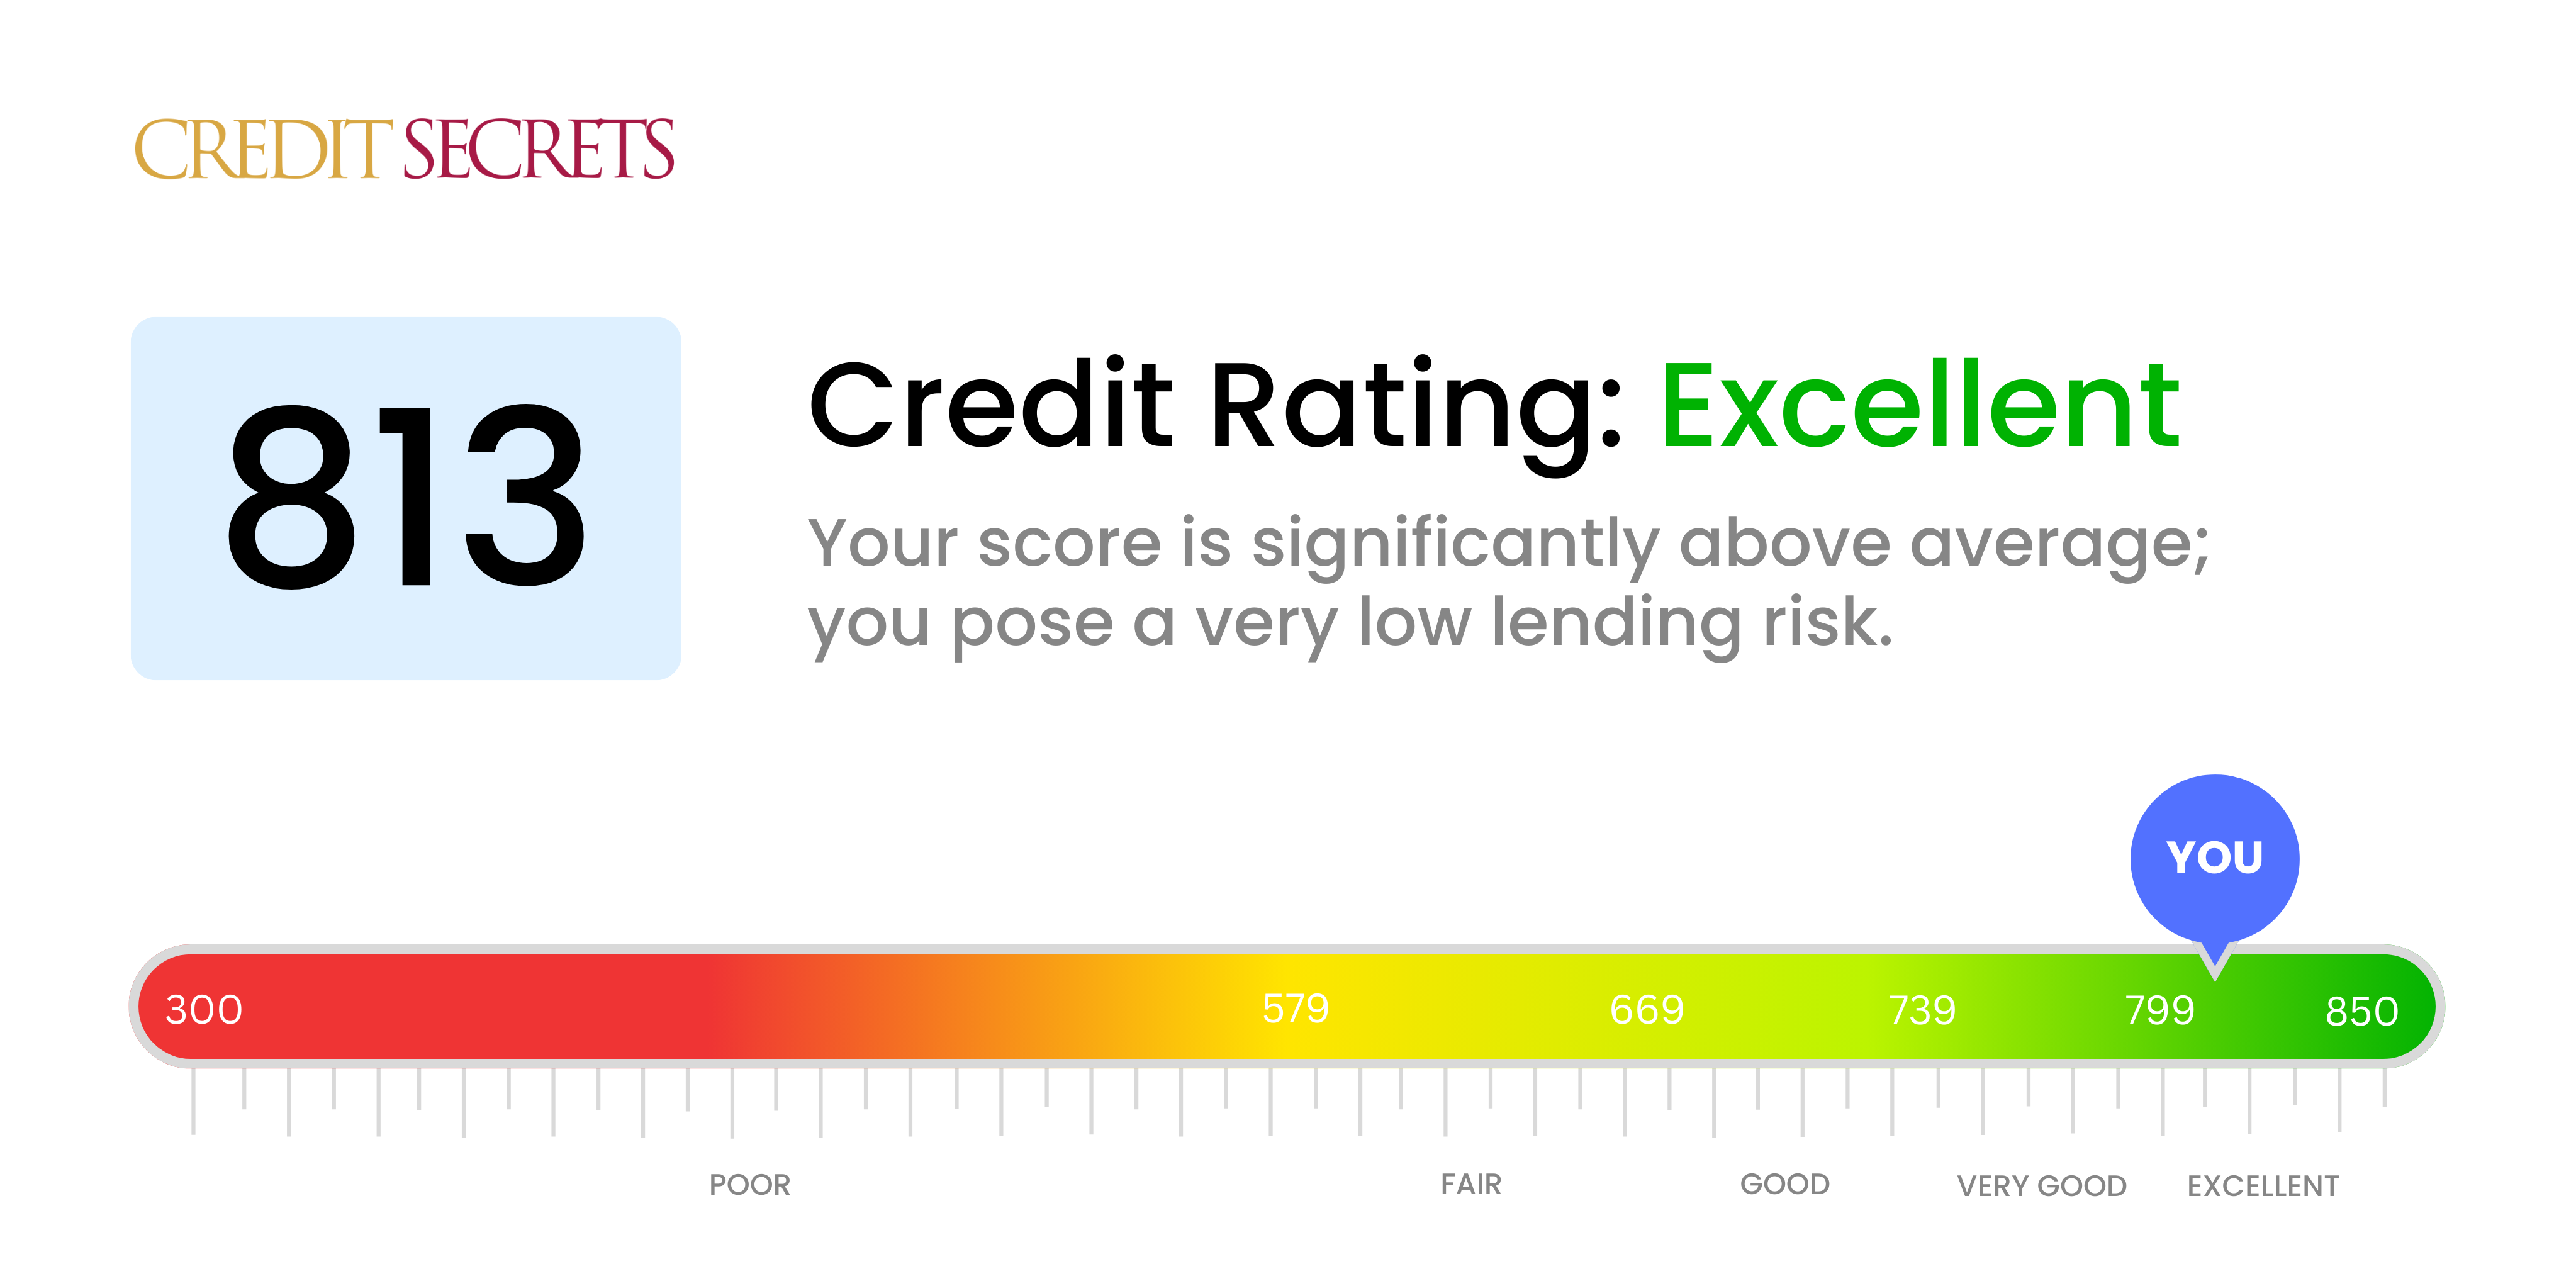 Is 813 a good credit score?